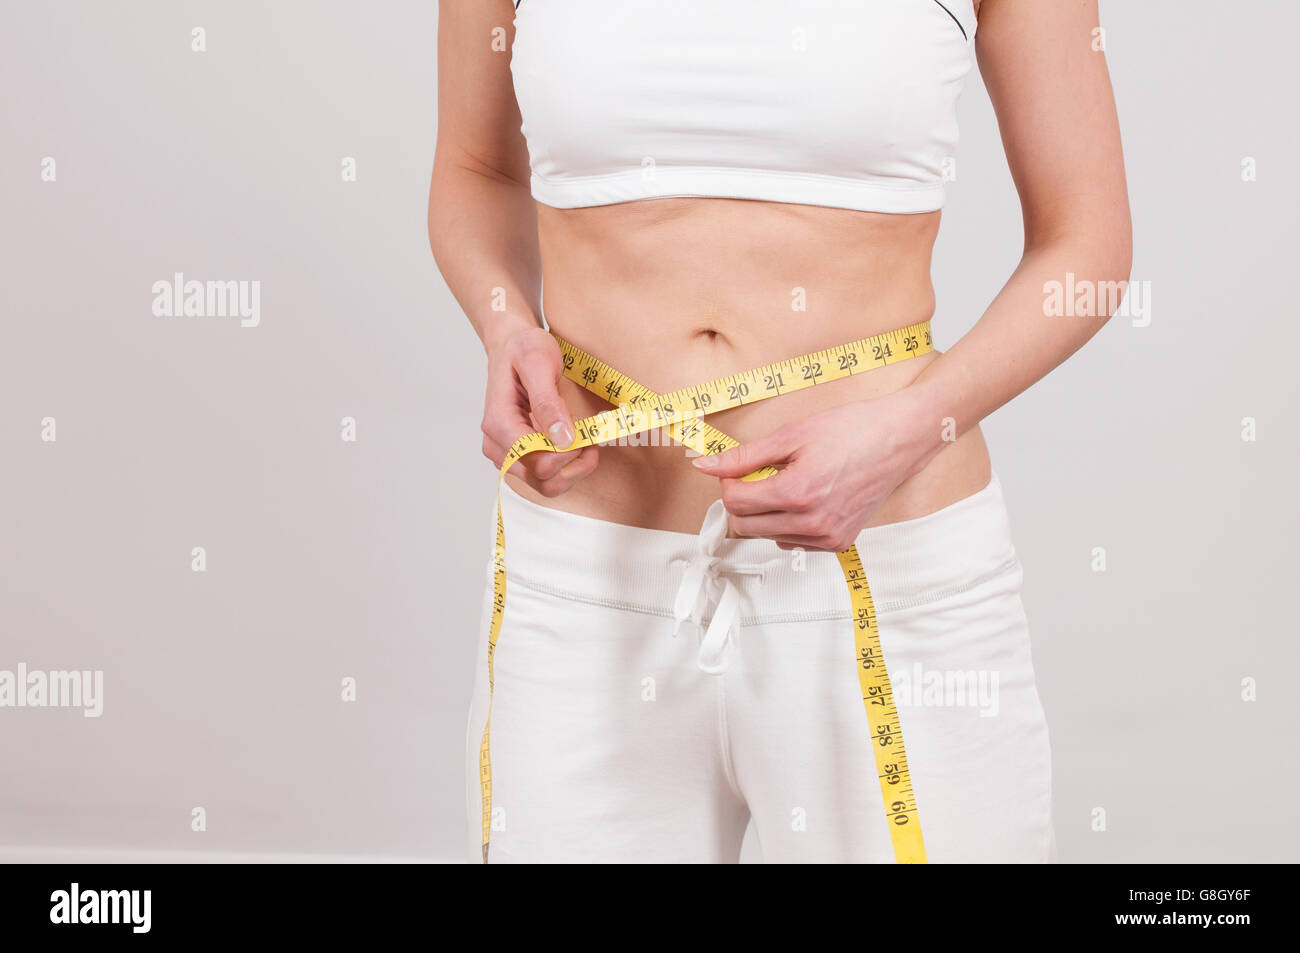 Size Fat Woman Wearing Black Bra Using Tape Measure Check Stock Photo by  ©Voyagerix 448965388